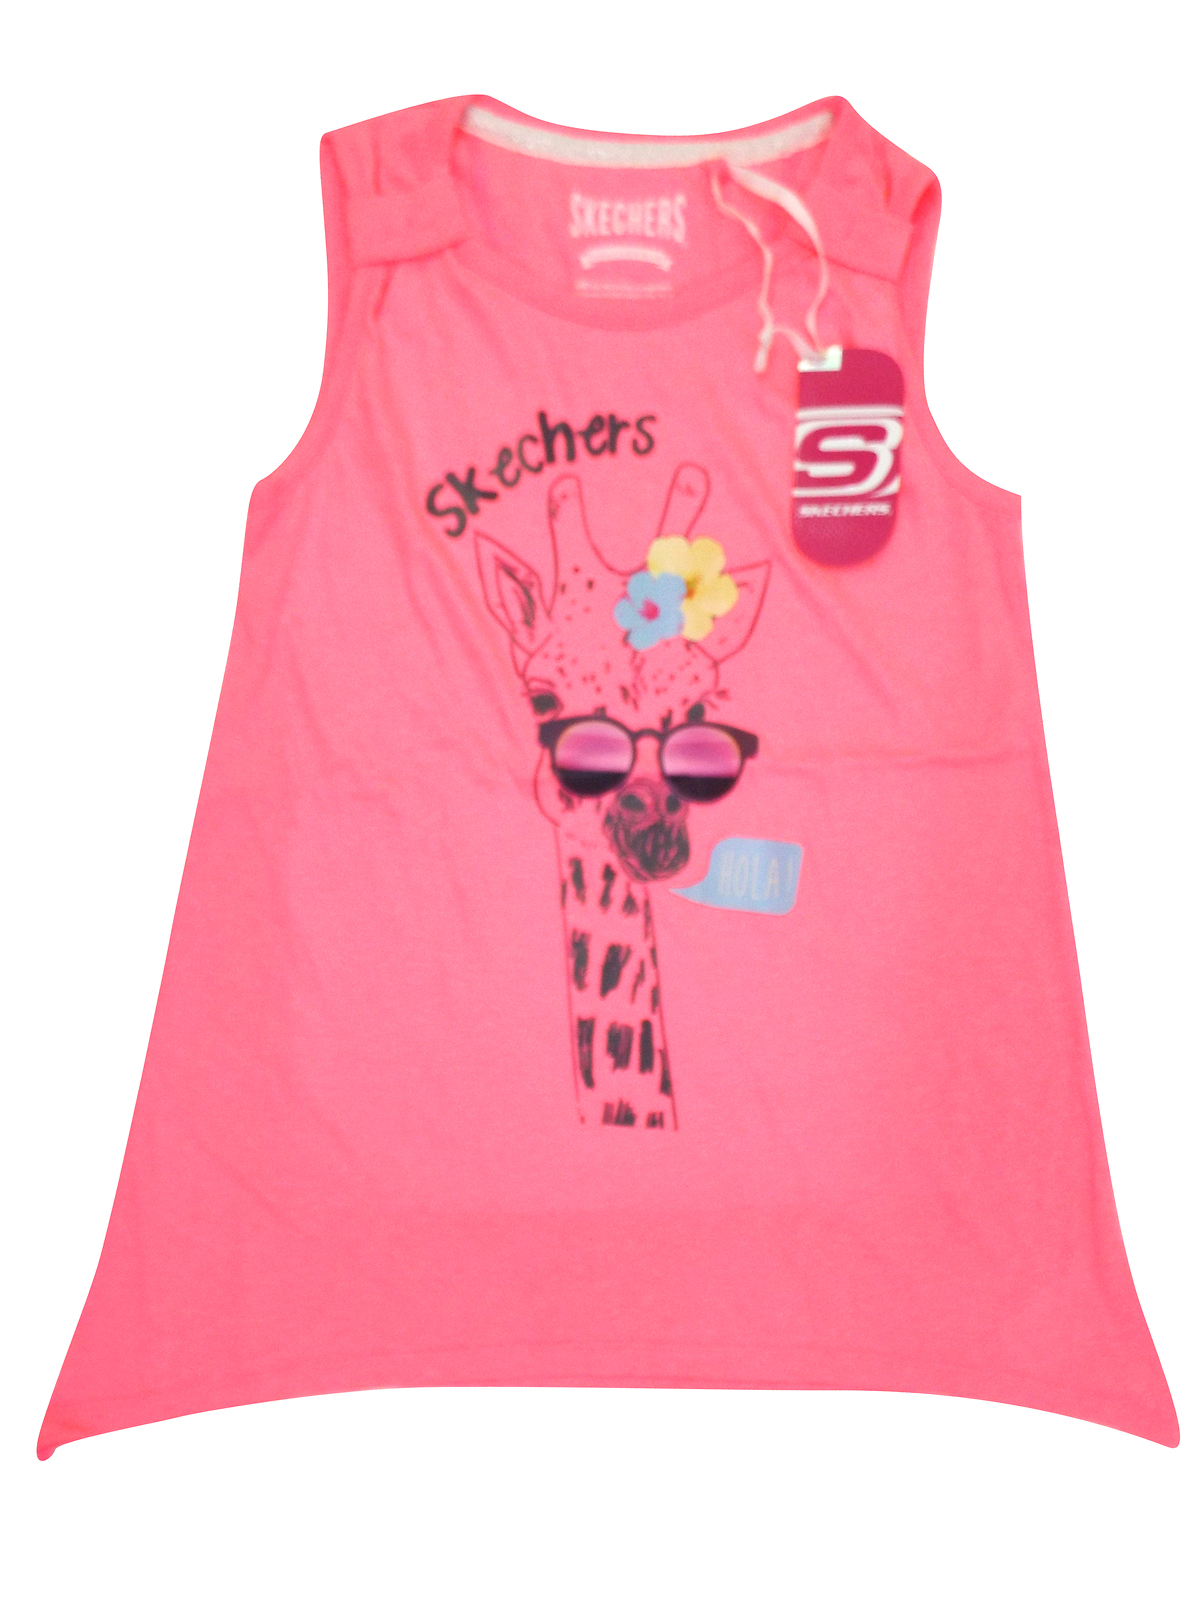 Skechers - - Skechers ASSORTED Girls Printed T-Shirts - Age 8/9yrs